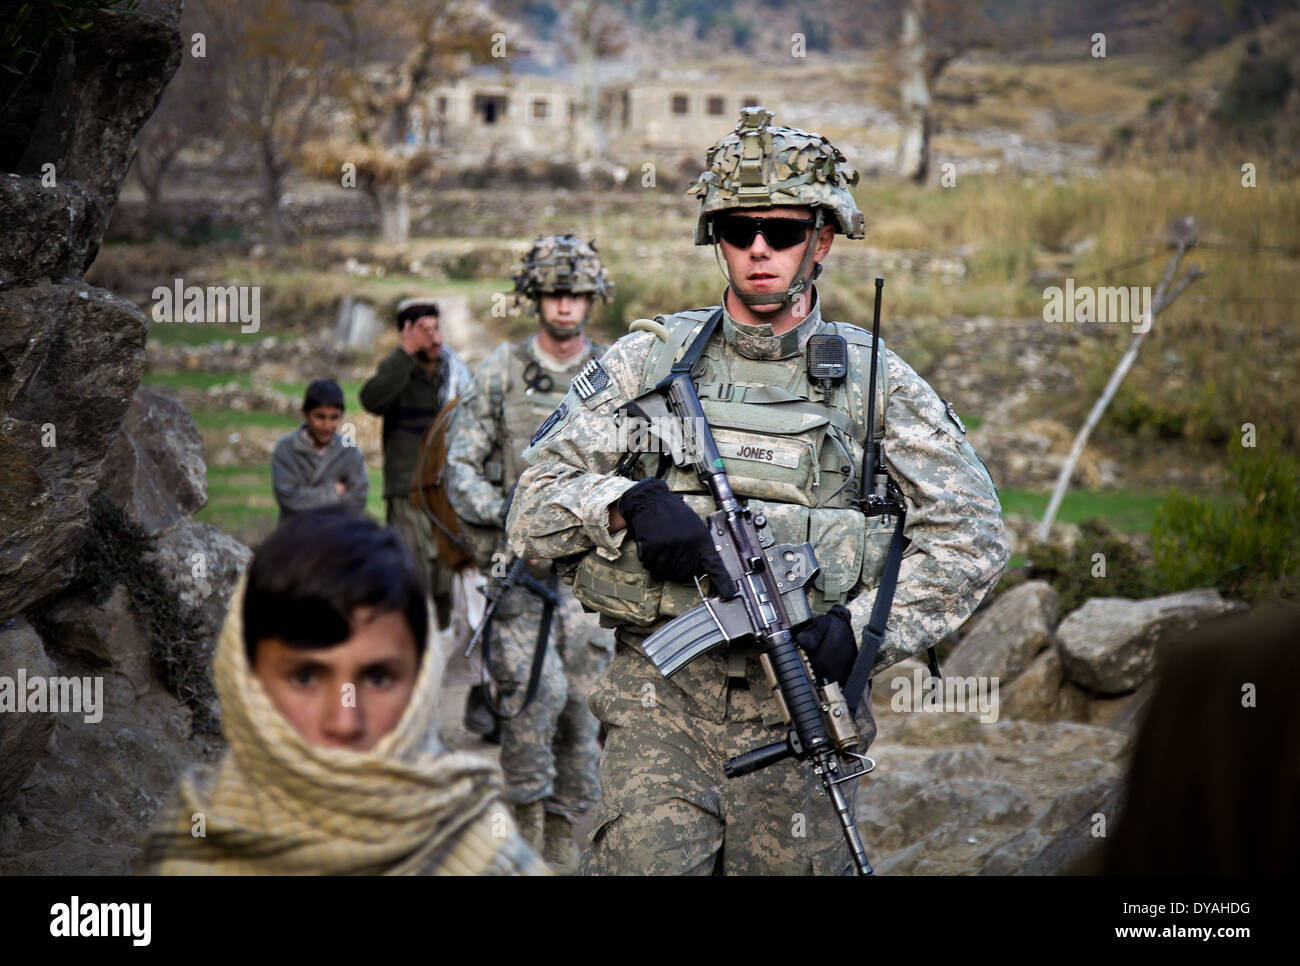 US Army soldiers with the Kunar Provincial Reconstruction Team, depart after holding a shura, or meeting December 7, 2009 in Lachey village, Shigal district, Kunar province, Afghanistan. Stock Photo